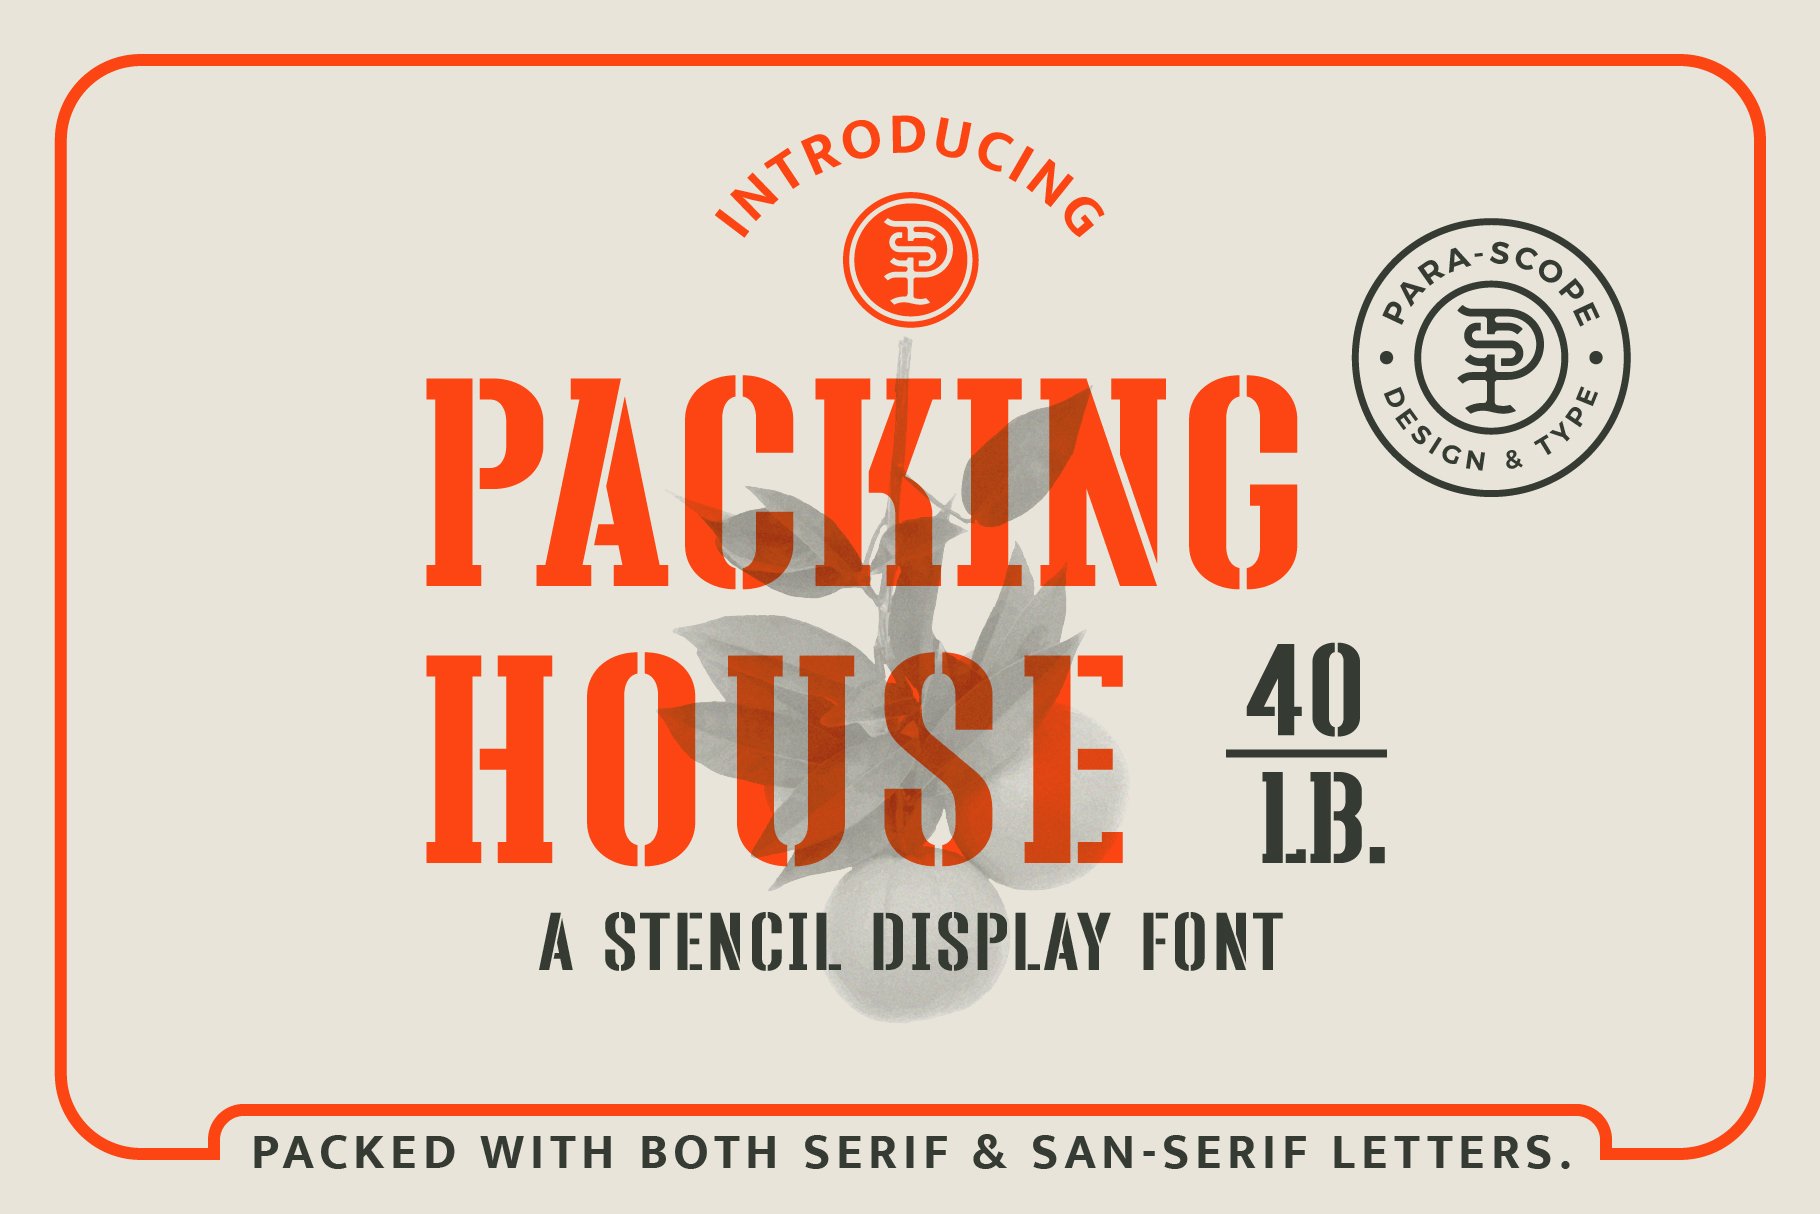 Packing House - Stencil Display Font cover image.